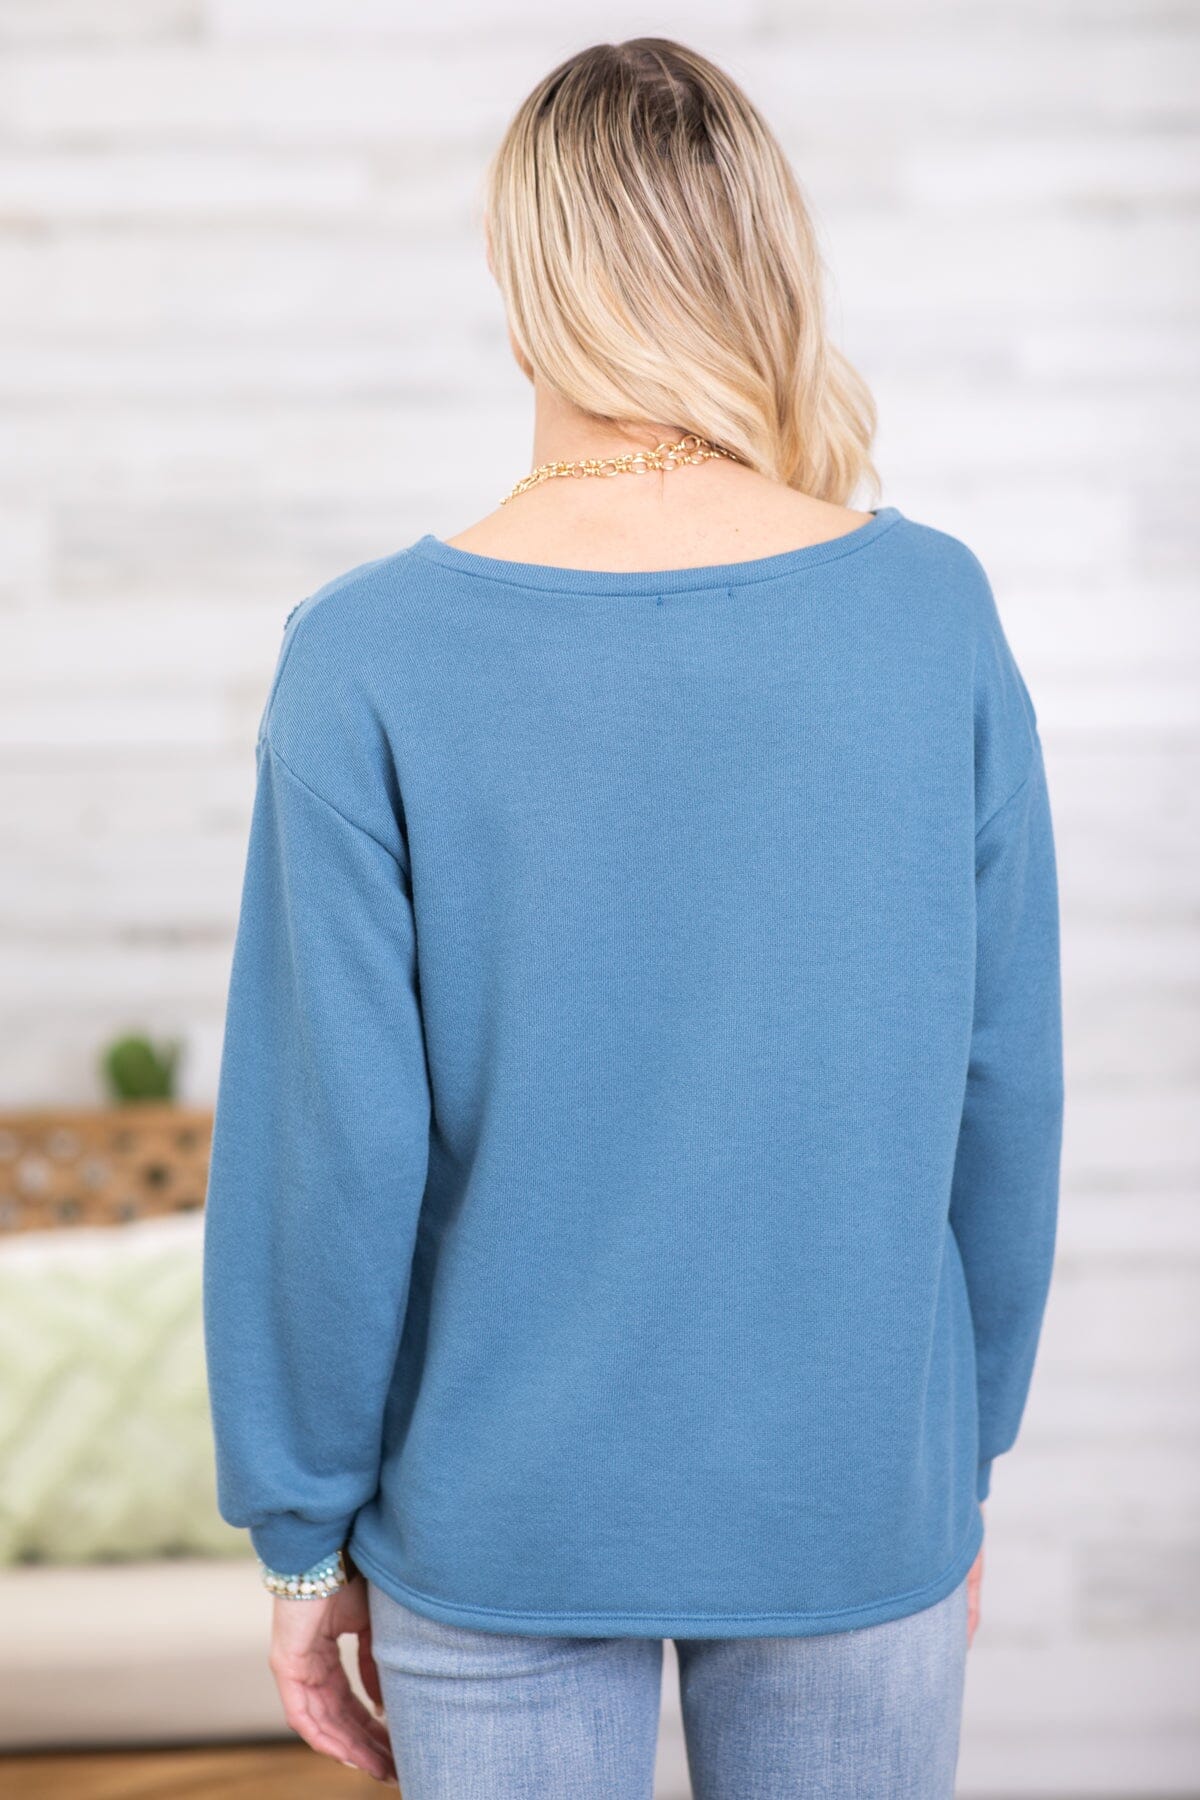 Dusty Blue Sweatshirt With Cutouts - Filly Flair